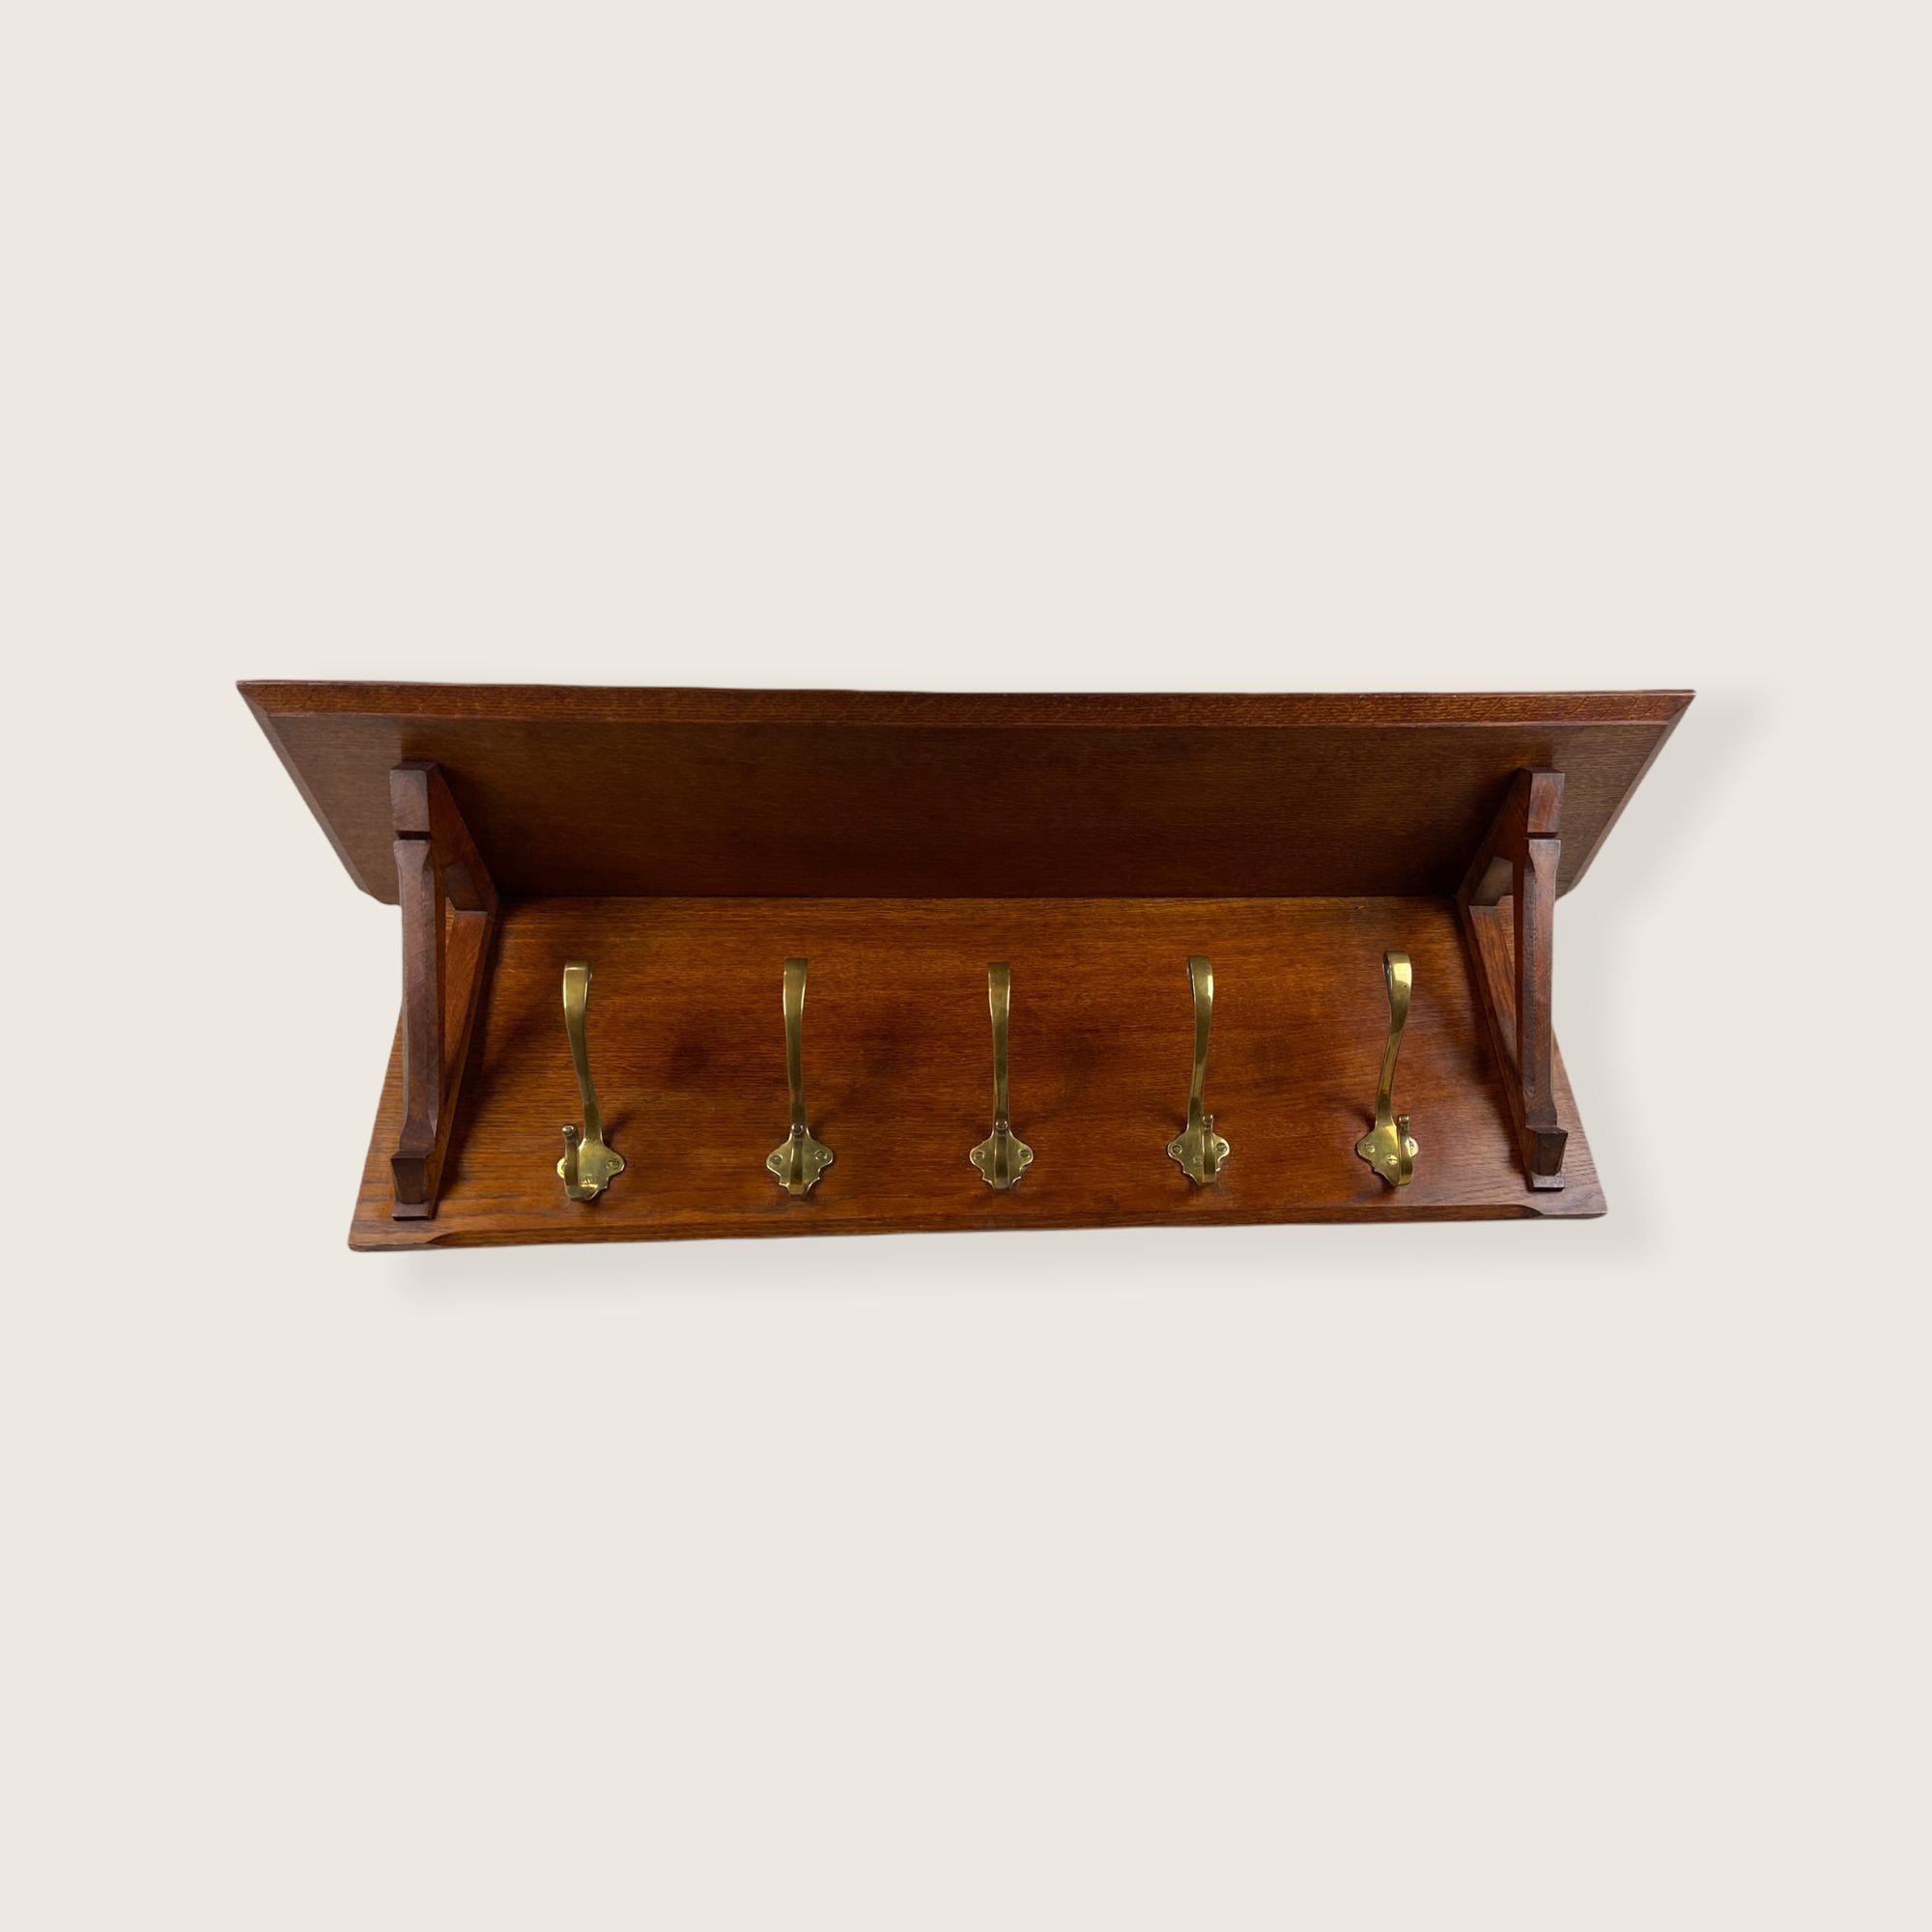 Arts & Crafts coat rack made of oak in England. With the original forged copper hooks. This object is in a good condition but it shows sign of age.